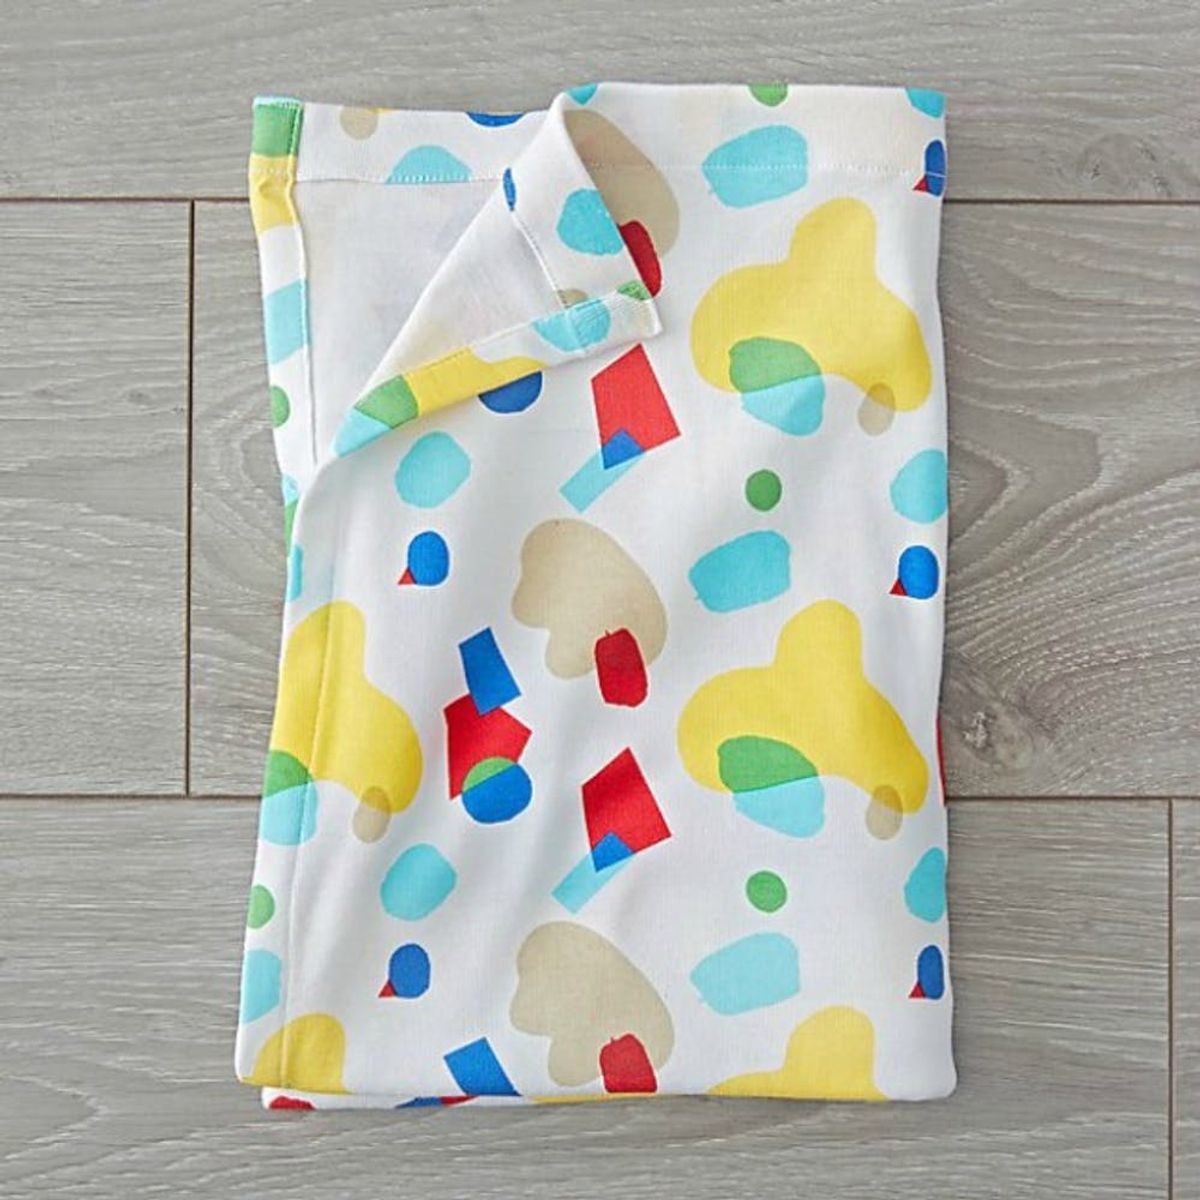 10 Cozy Blankets to Keep Your Baby Warm This Winter